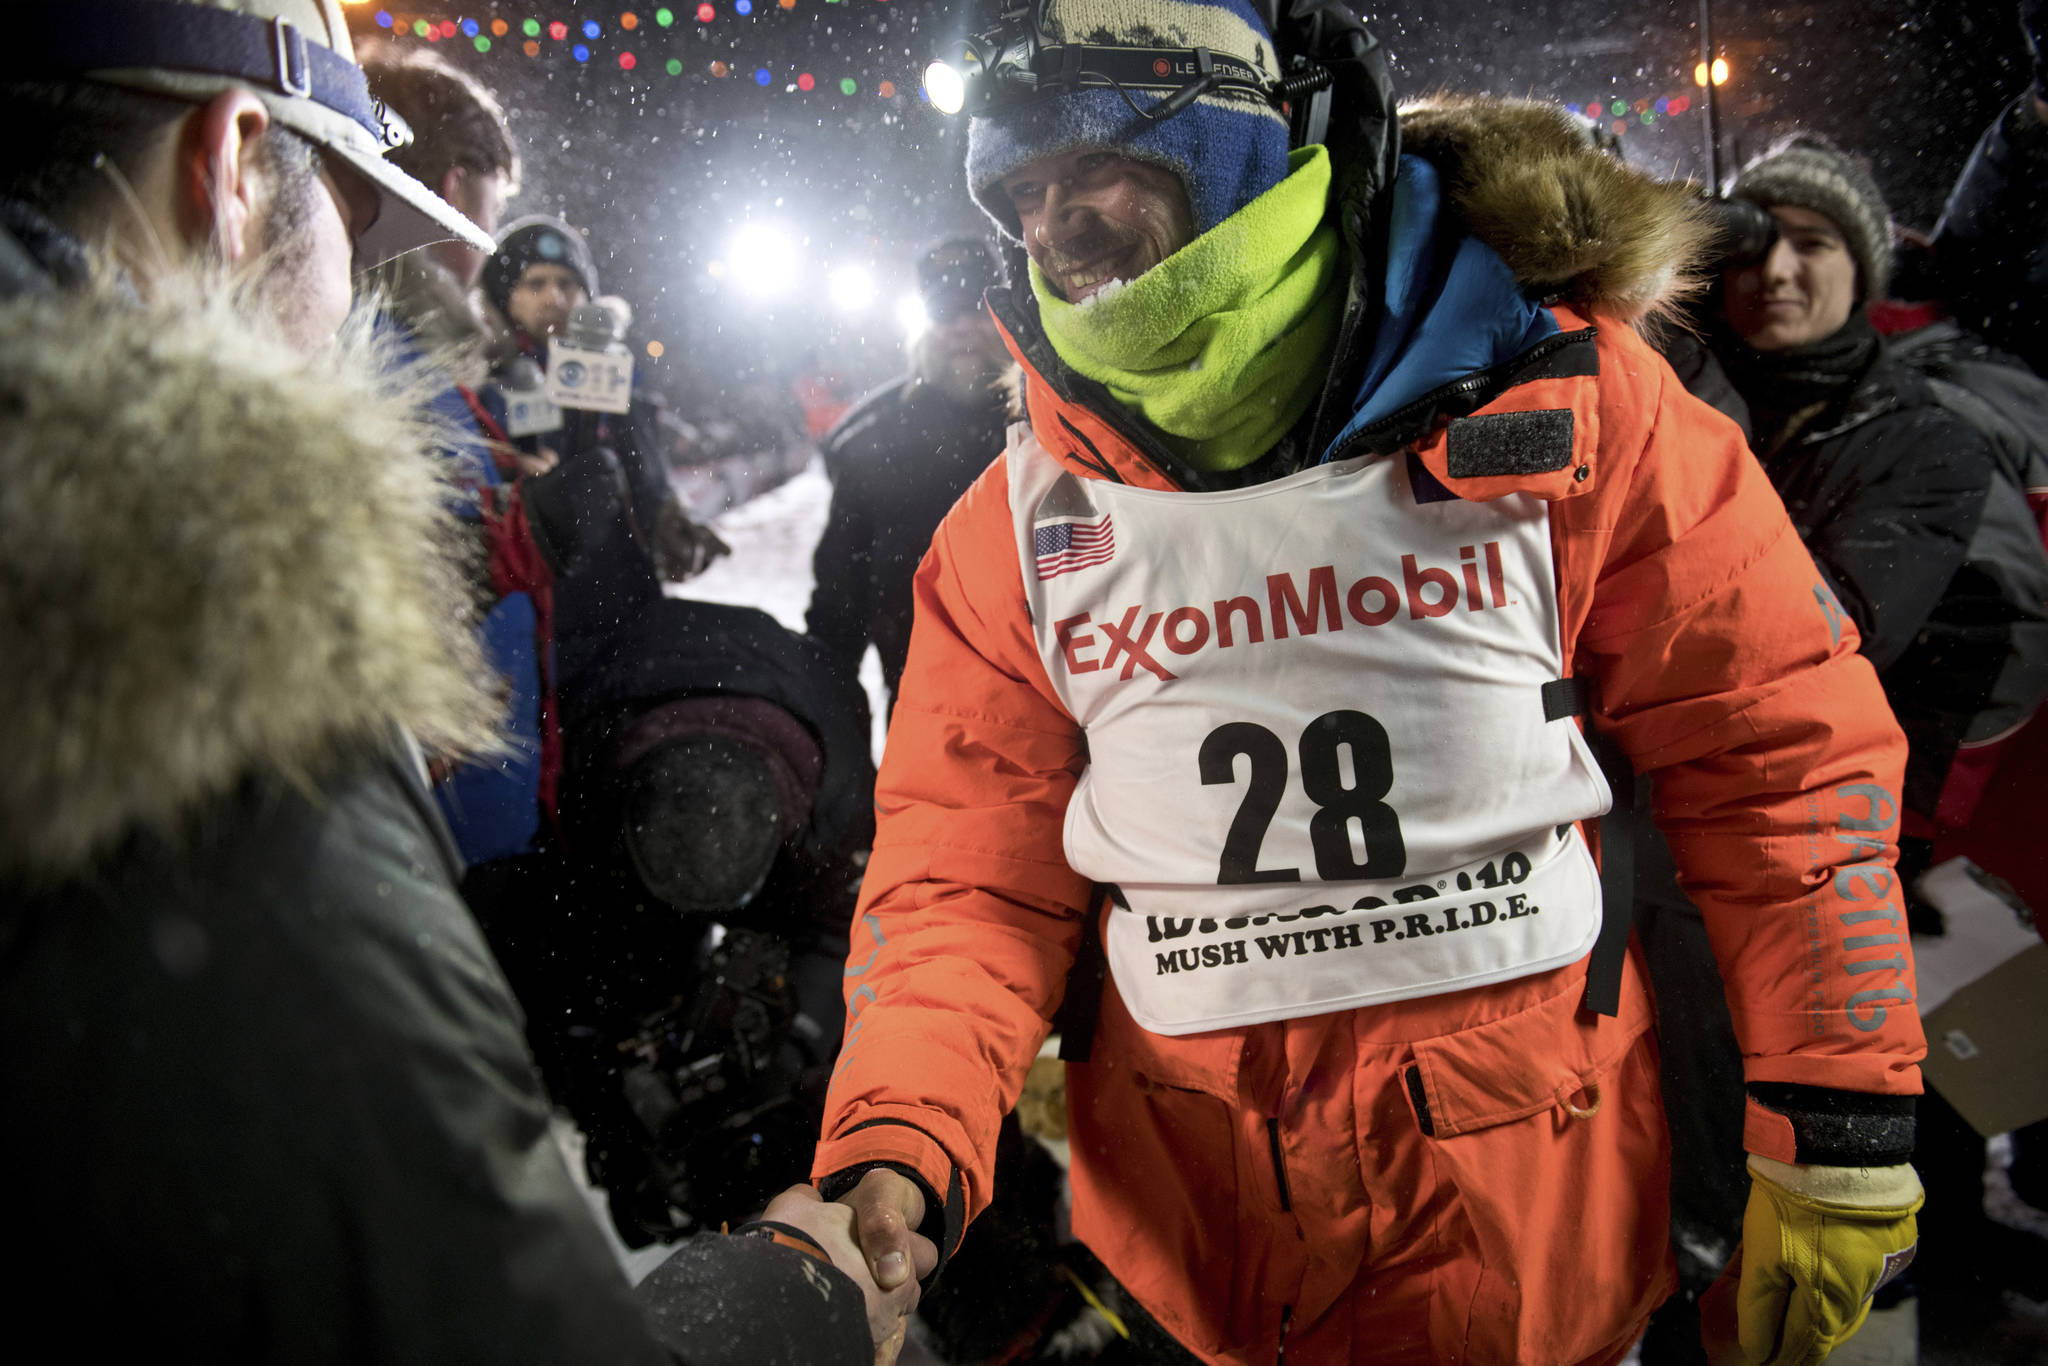 Joar Leifseth Ulsom, right, wearing a bib with ExxonMobil lettering on it, congratulates Peter Kaiser on his win in the Iditarod Trail Sled Dog Race in Nome, Alaska. The world’s most famous sled dog race has lost another major sponsor as the Iditarod prepares for a scaled-back version of this year’s race because of the pandemic, officials said Thursday, Jan. 21, 2021. ExxonMobil confirmed to The Associated Press that the oil giant will drop its sponsorship of the race. (Marc Lester / Anchorage Daily News)